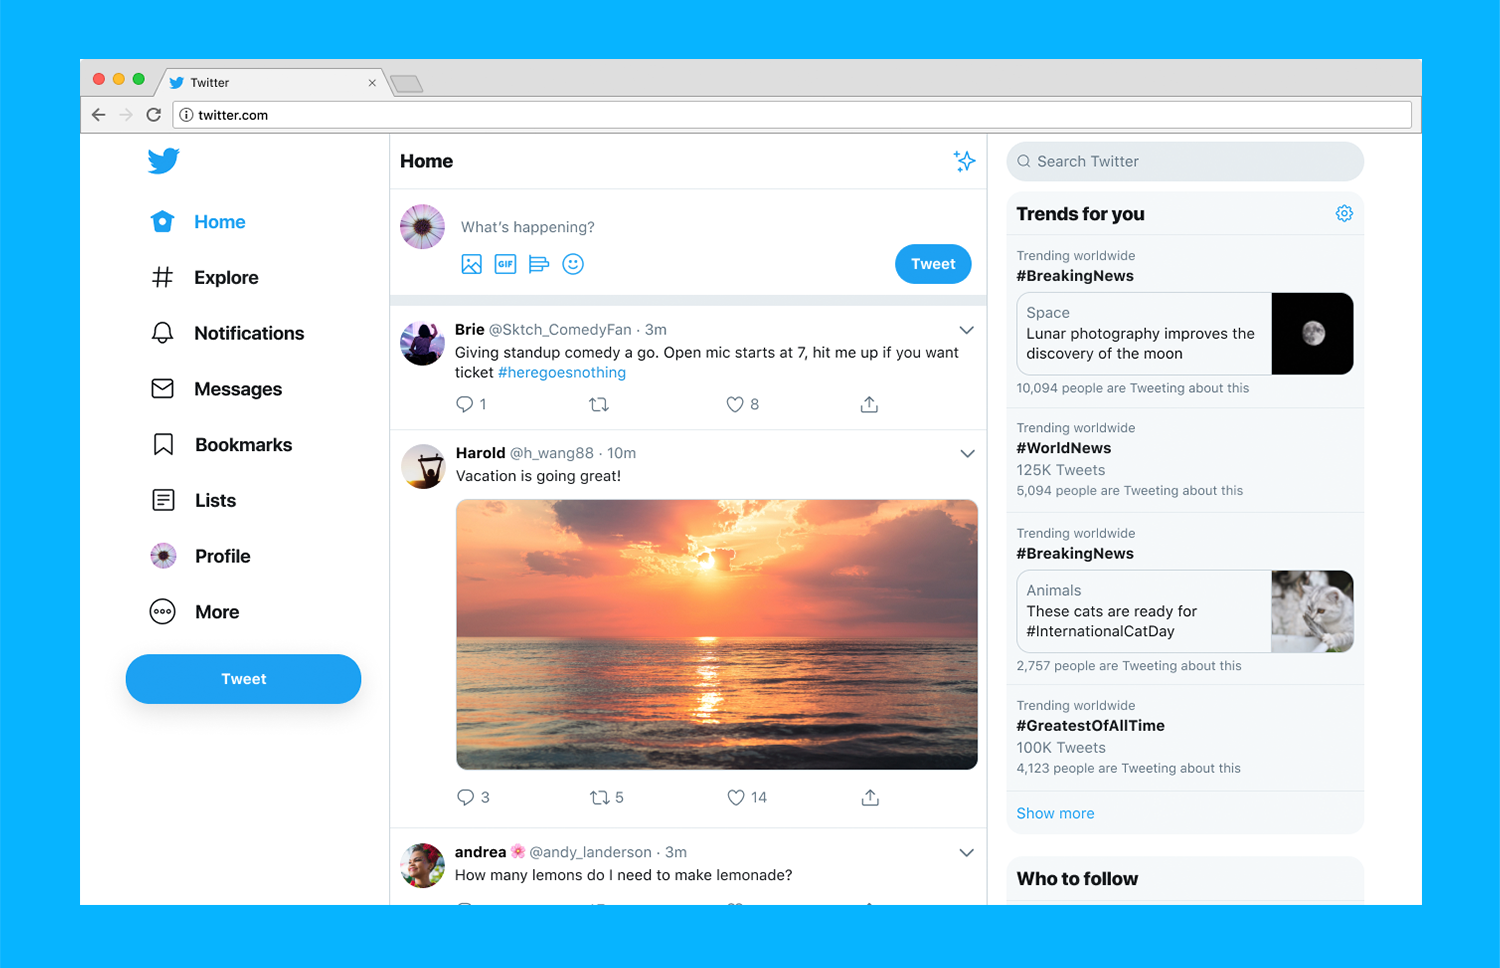 Twitter.com launches its big redesign with simpler navigation and more features